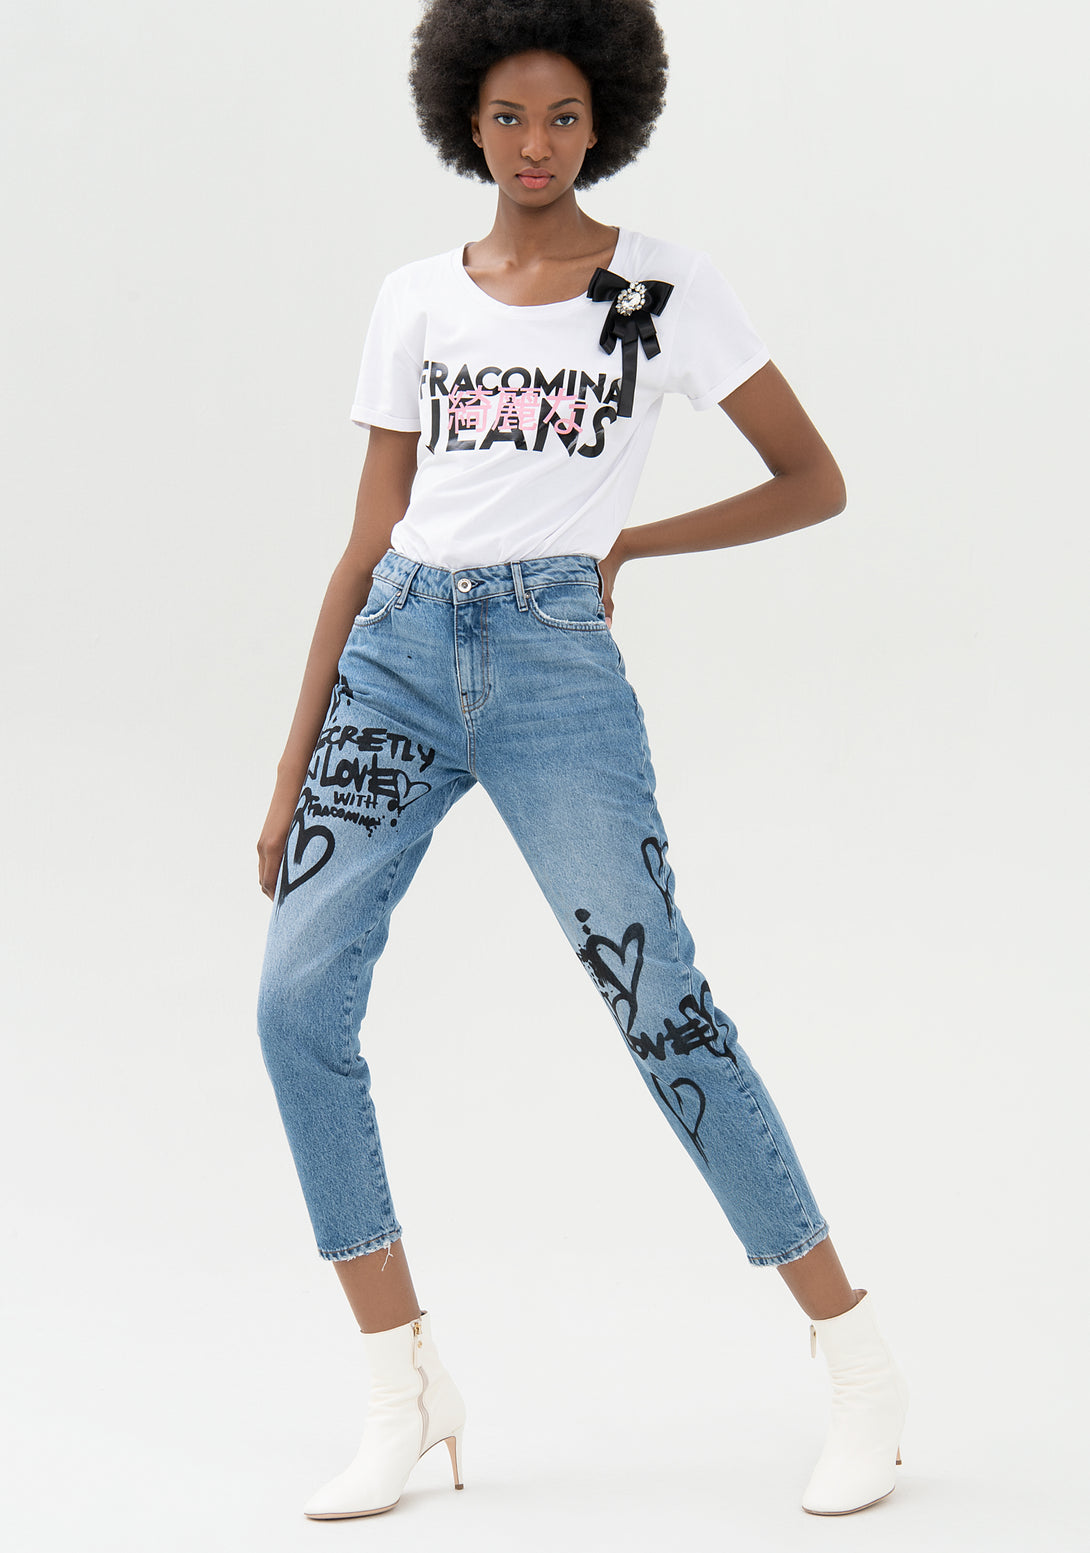 Jeans loose fit cropped made in denim with light wash